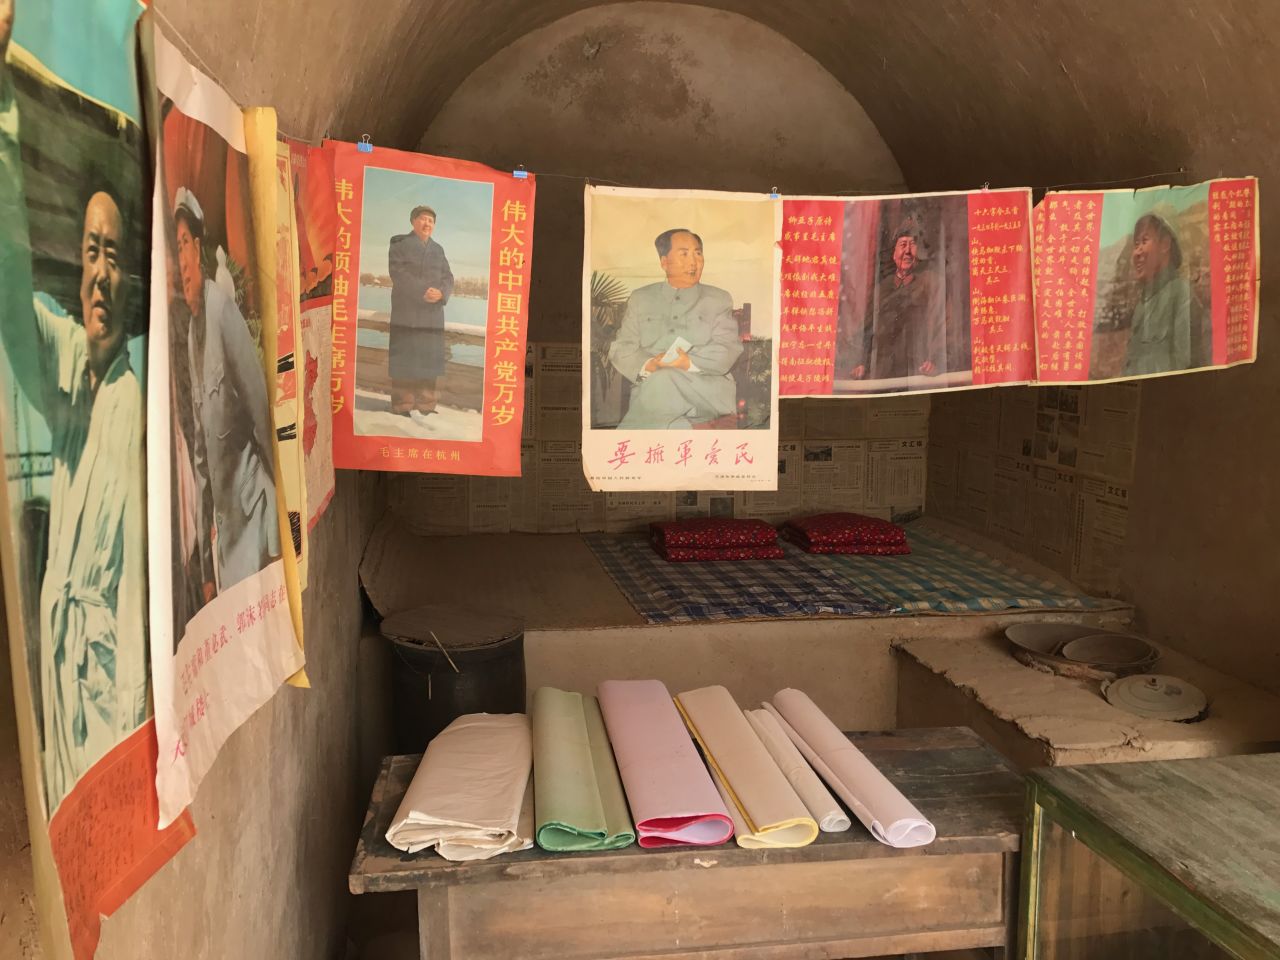 Posters of Mao Zedong and other reproduced Cultural Revolution-era articles are on display in several "cave houses" that Xi lived in the village.